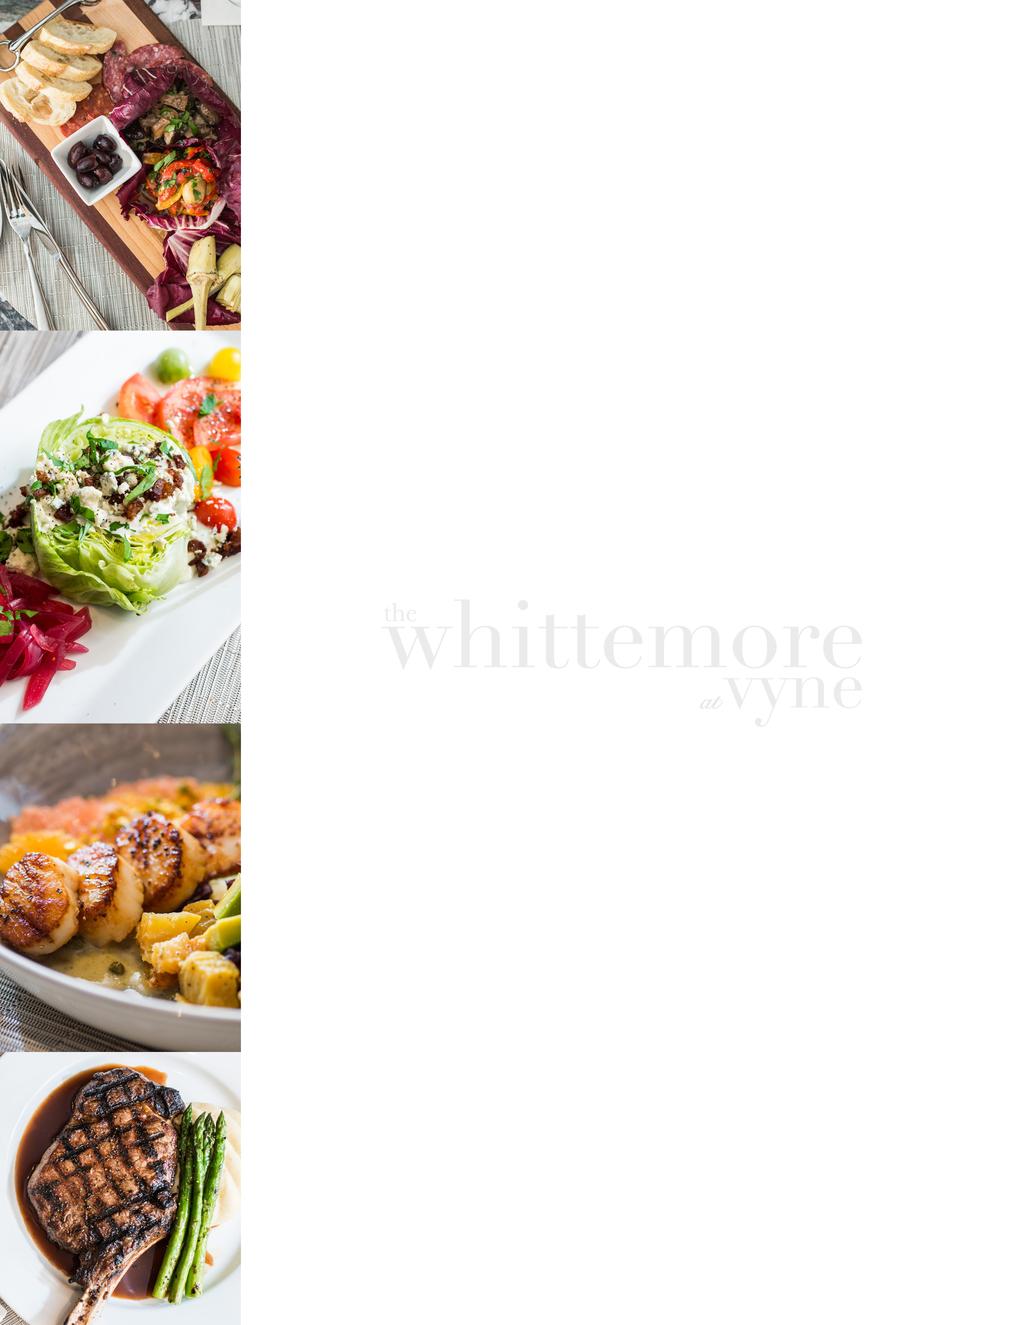 The Whittemore at Vyne Hors d oeuvres Options Stationary Hors d oeuvres (Amount Customizable) Crudités Display artful arrangement of fresh vegetables served with choice of hummus, ranch, or spinach